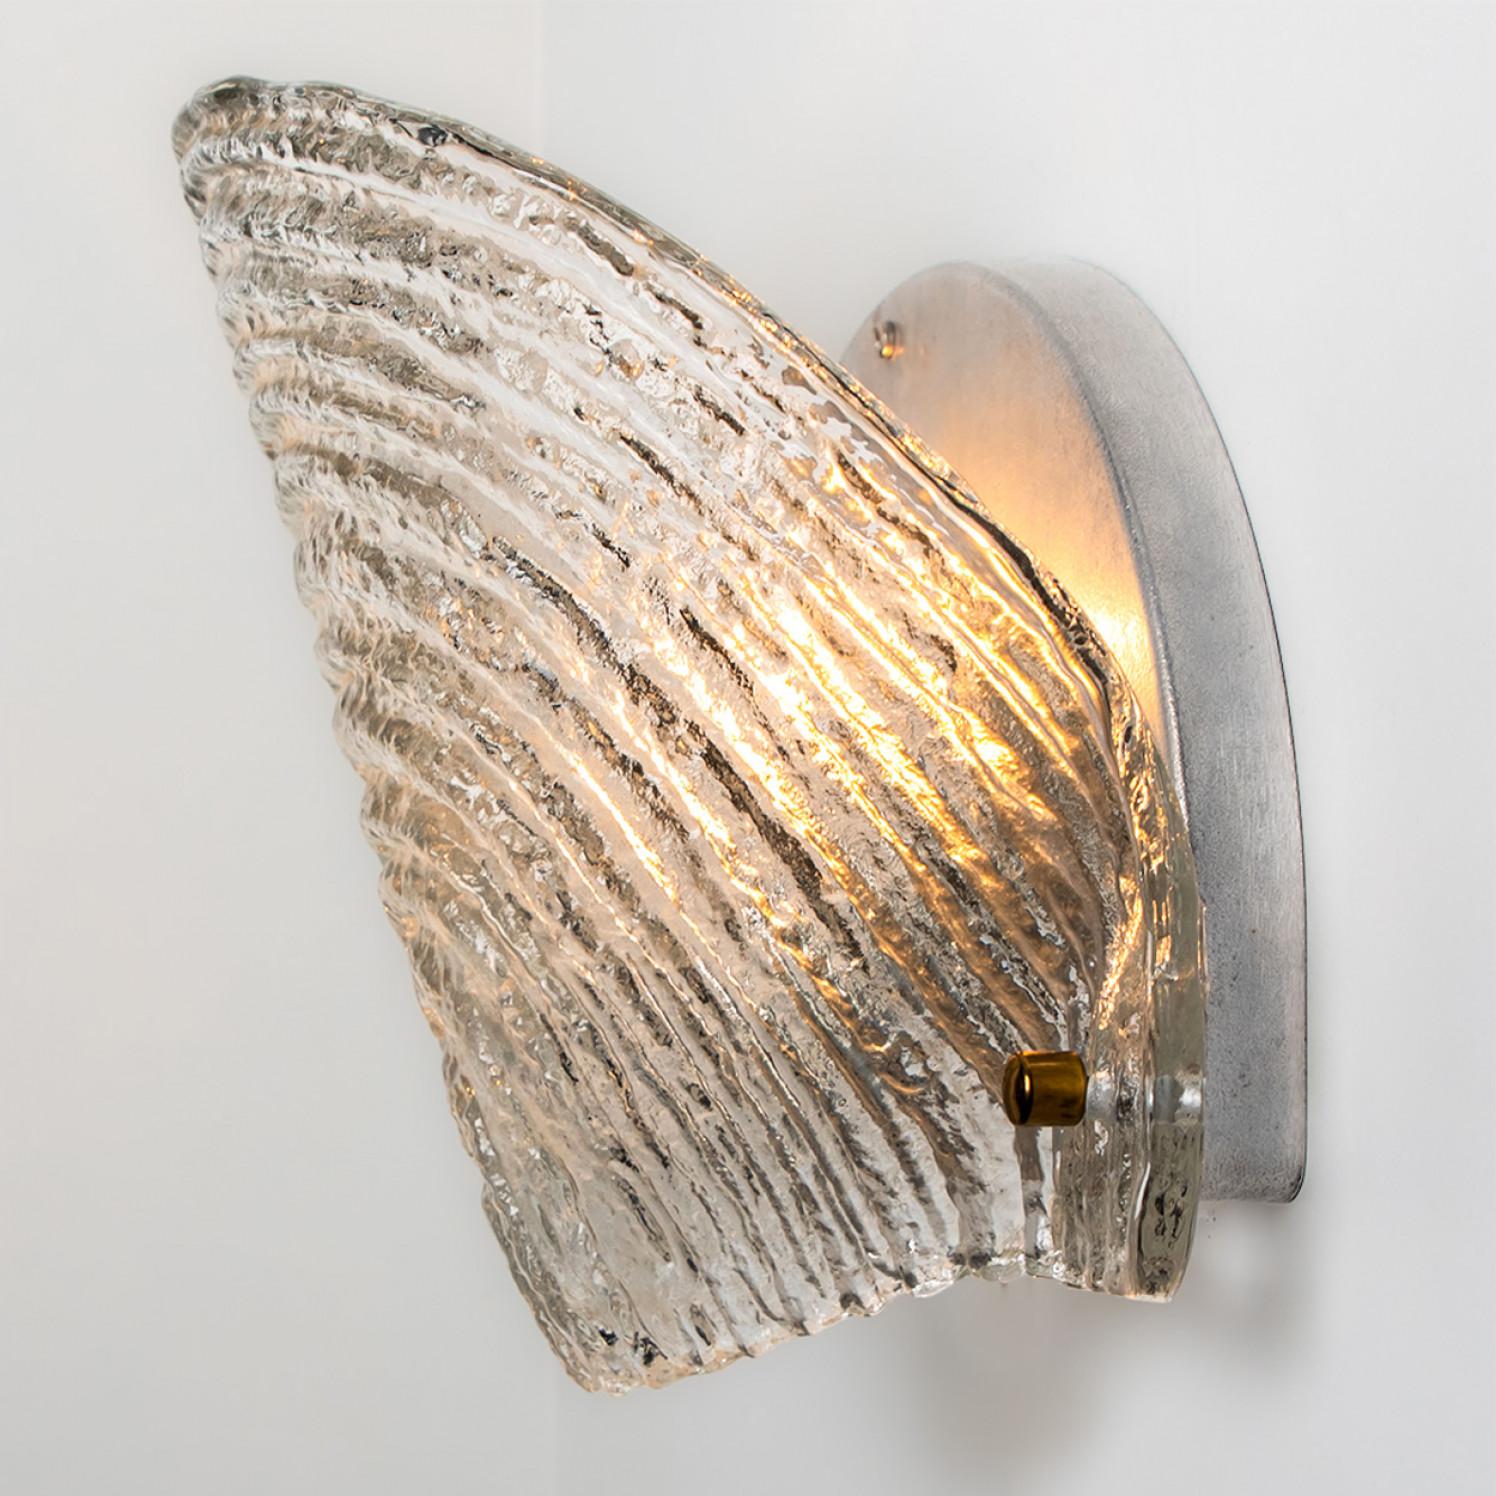 Pair of Shell shaped wall lights in ribble textured glass with silver details. Manufactured by Glashütte Limburg in Germany during the 1970s. (early 1970s).

Nice craftsmanship. Minimal, geometric and simply shaped design.

Dimensions:
Height: 9.84